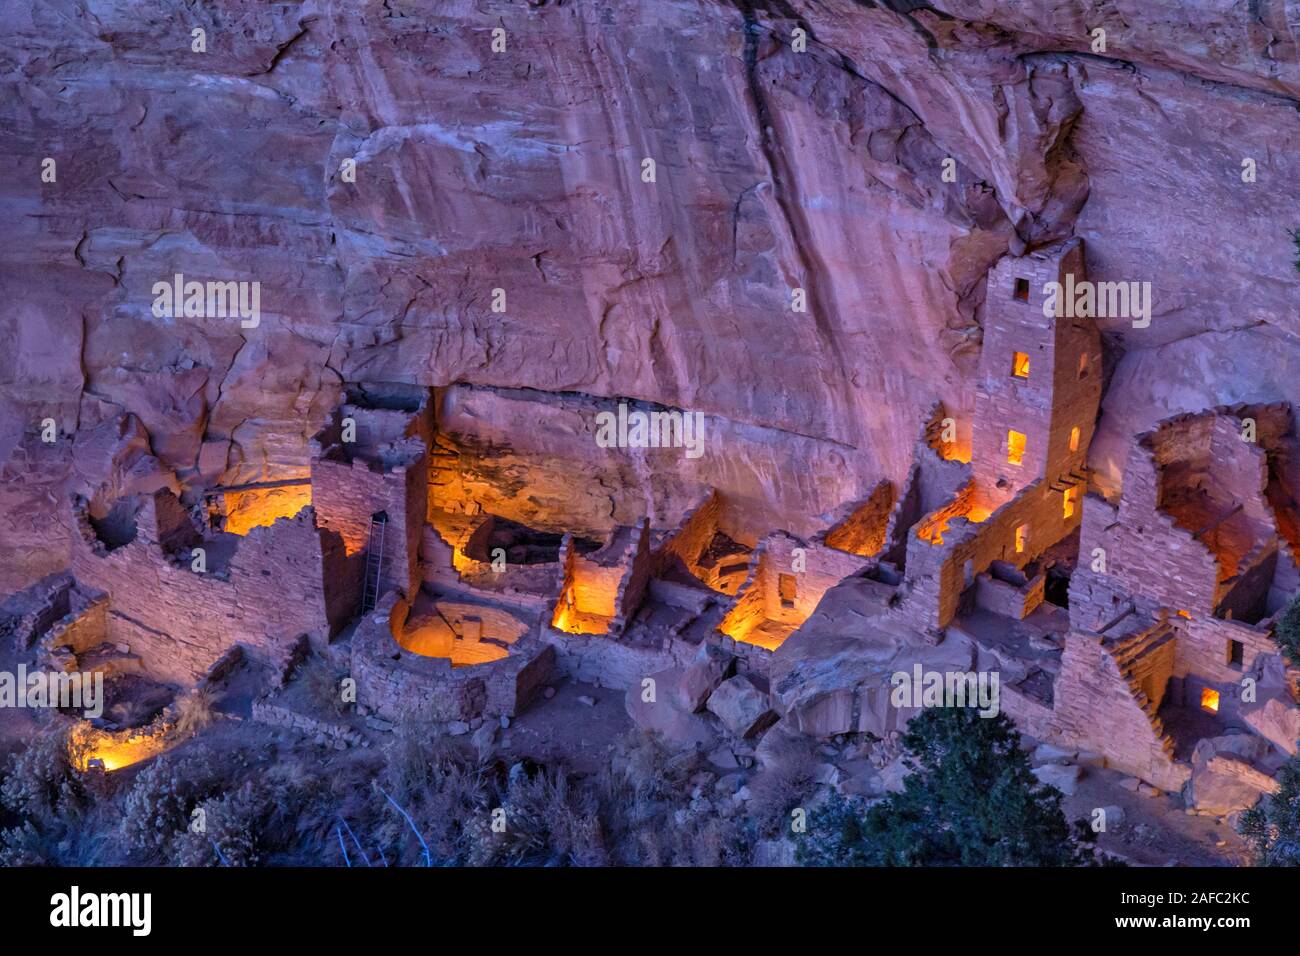 Square Tower House, the tallest cliff dwelling in Mesa Verde, illuminated for only the 2nd time during the Luminaria Festival in Mesa Verde National P Stock Photo